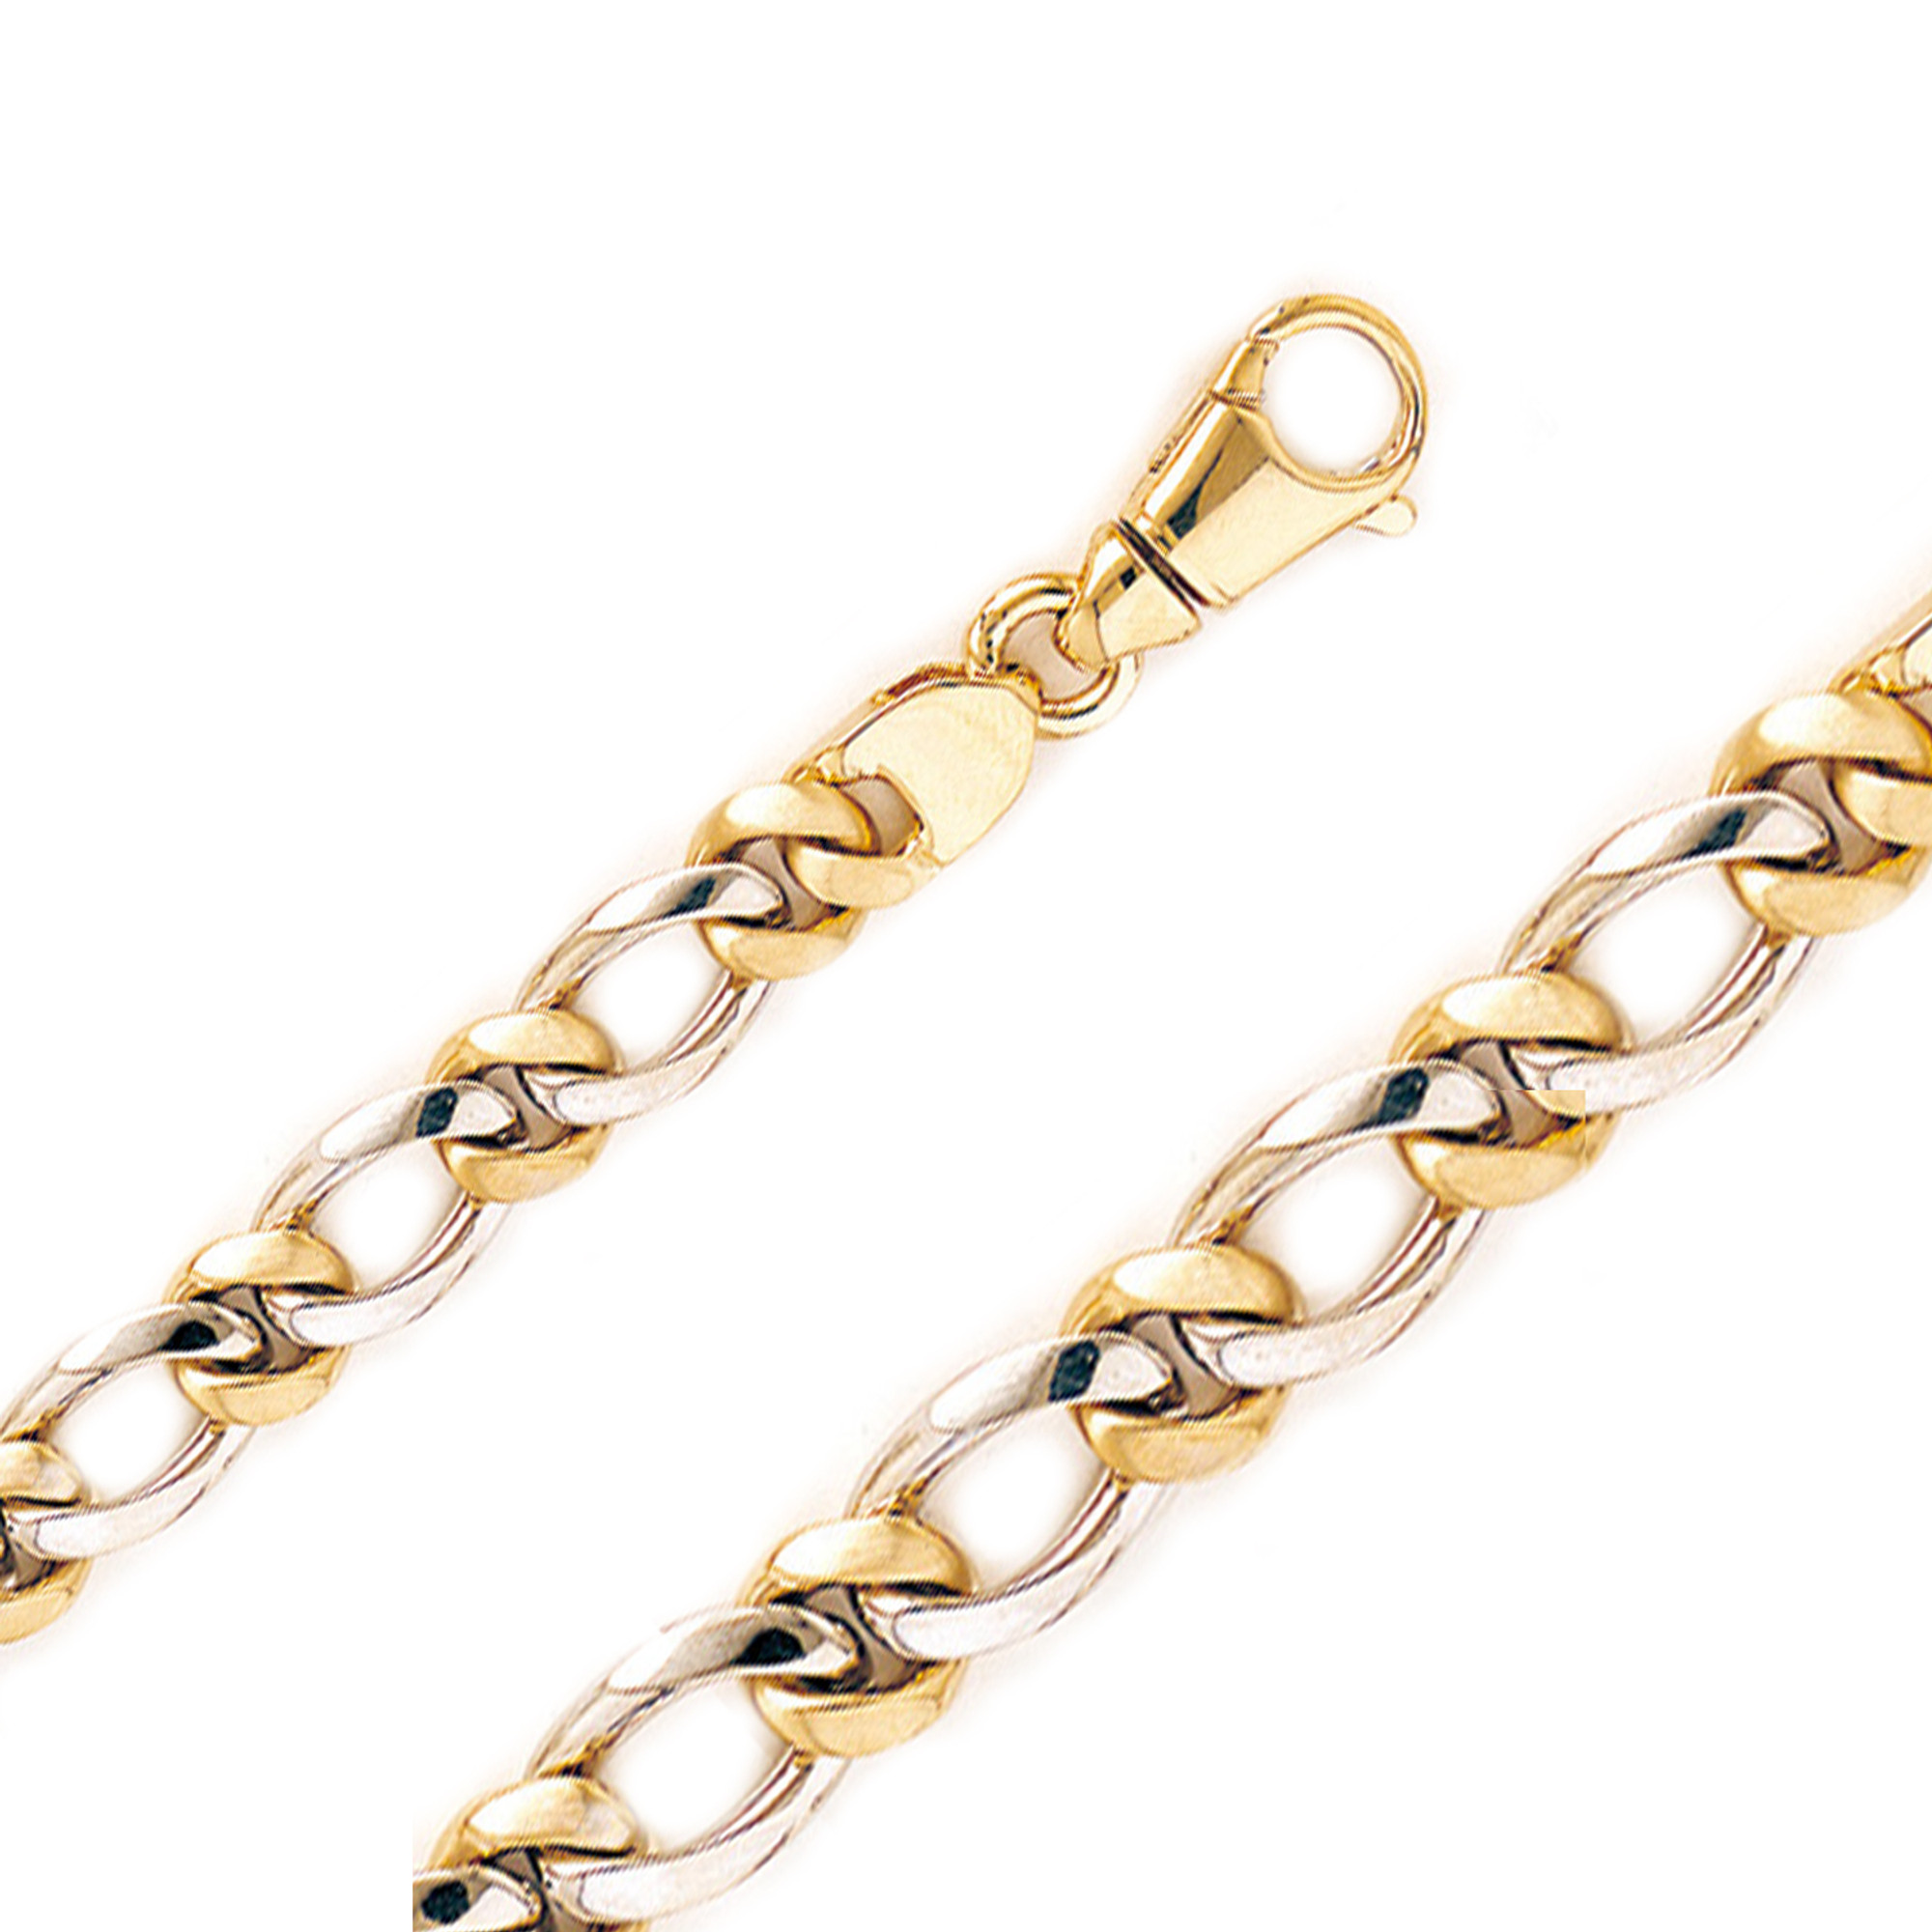 22K Yellow Gold Flat Wheat Chain - Shop Our 22K Gold Rope Chains!